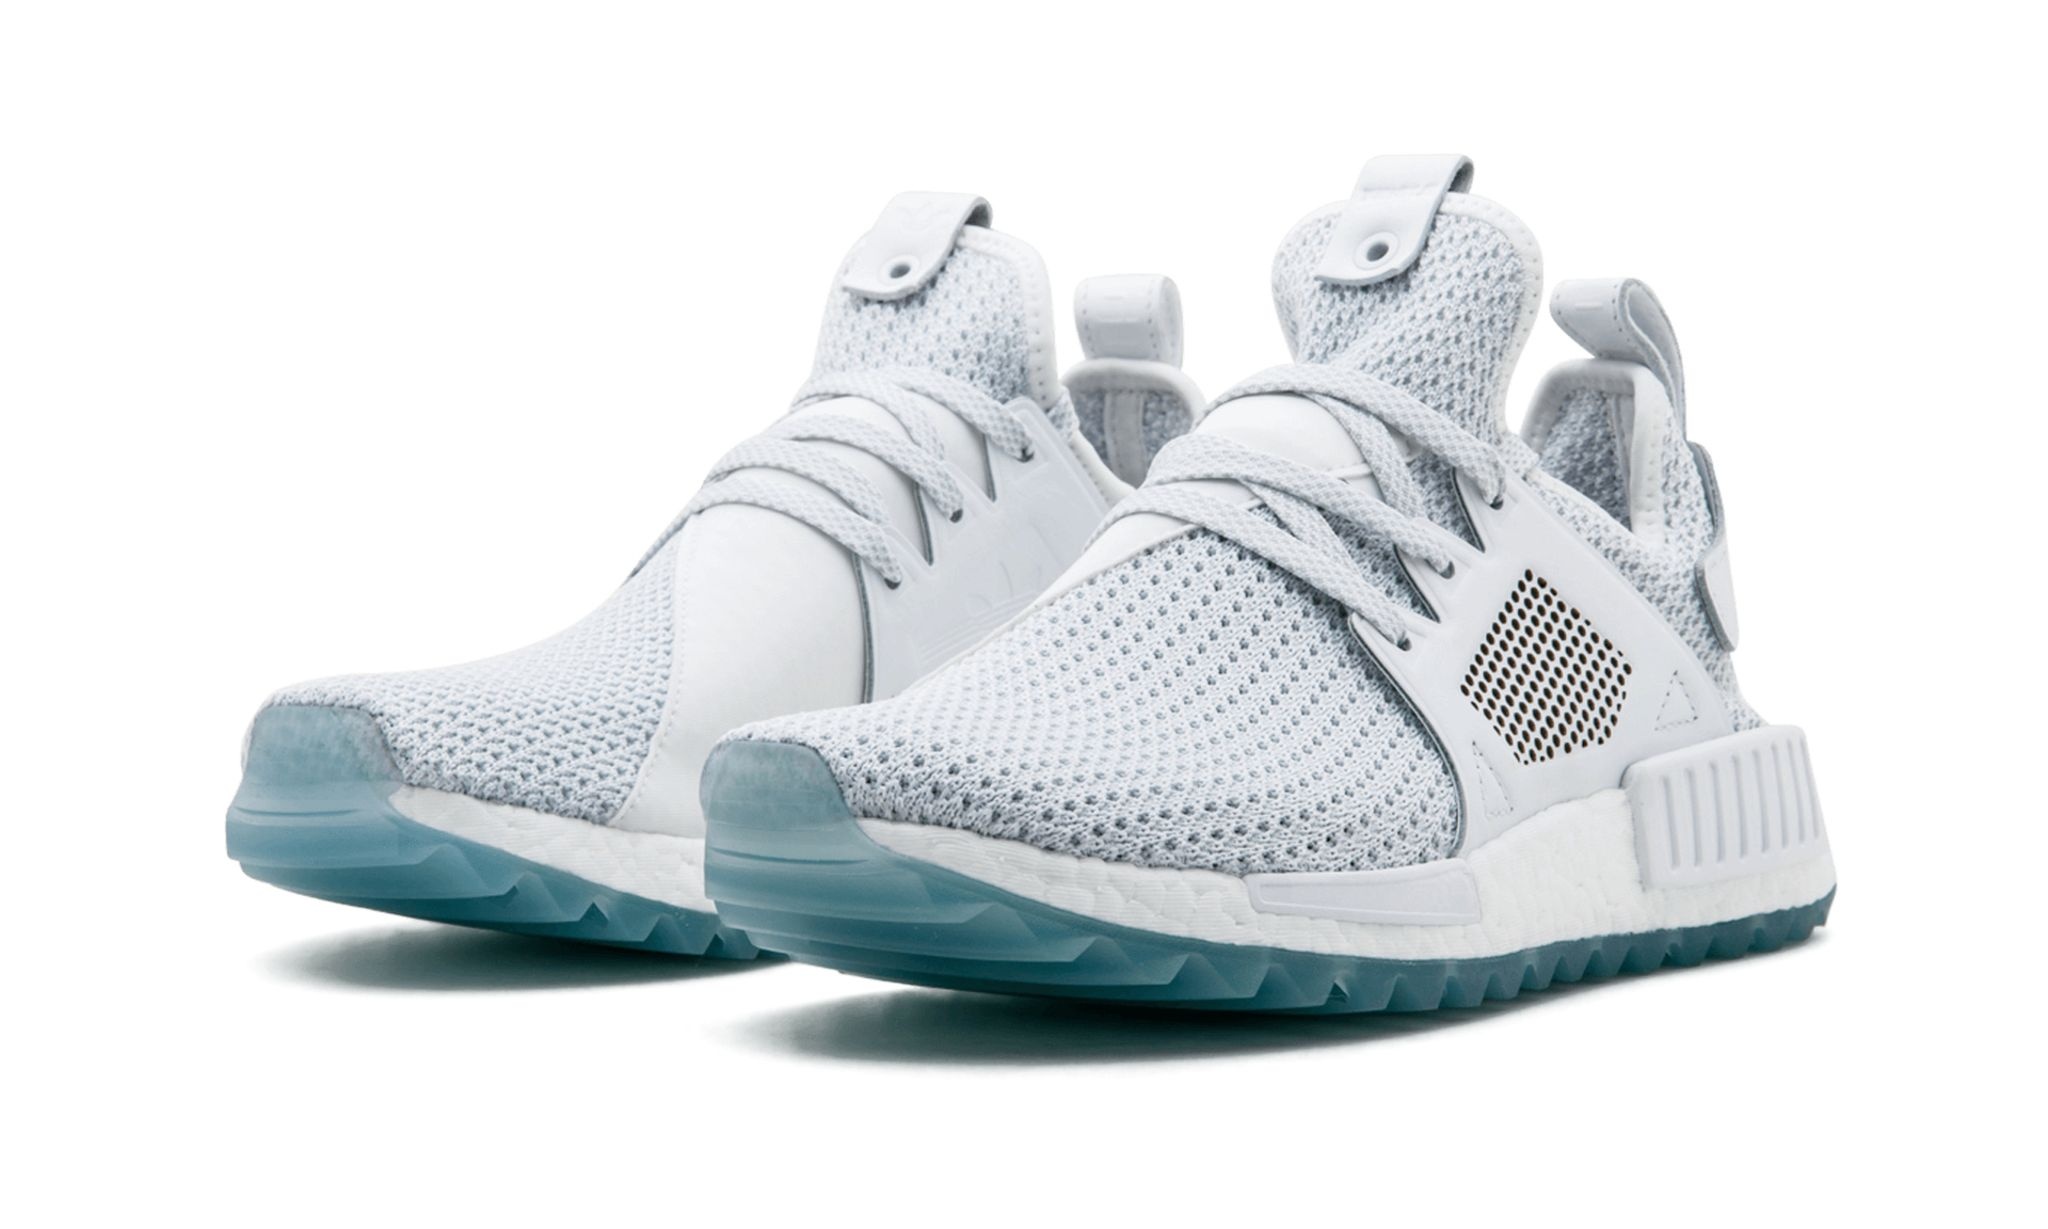 NMD_XR1 TR Titolo "Celestial" - 2